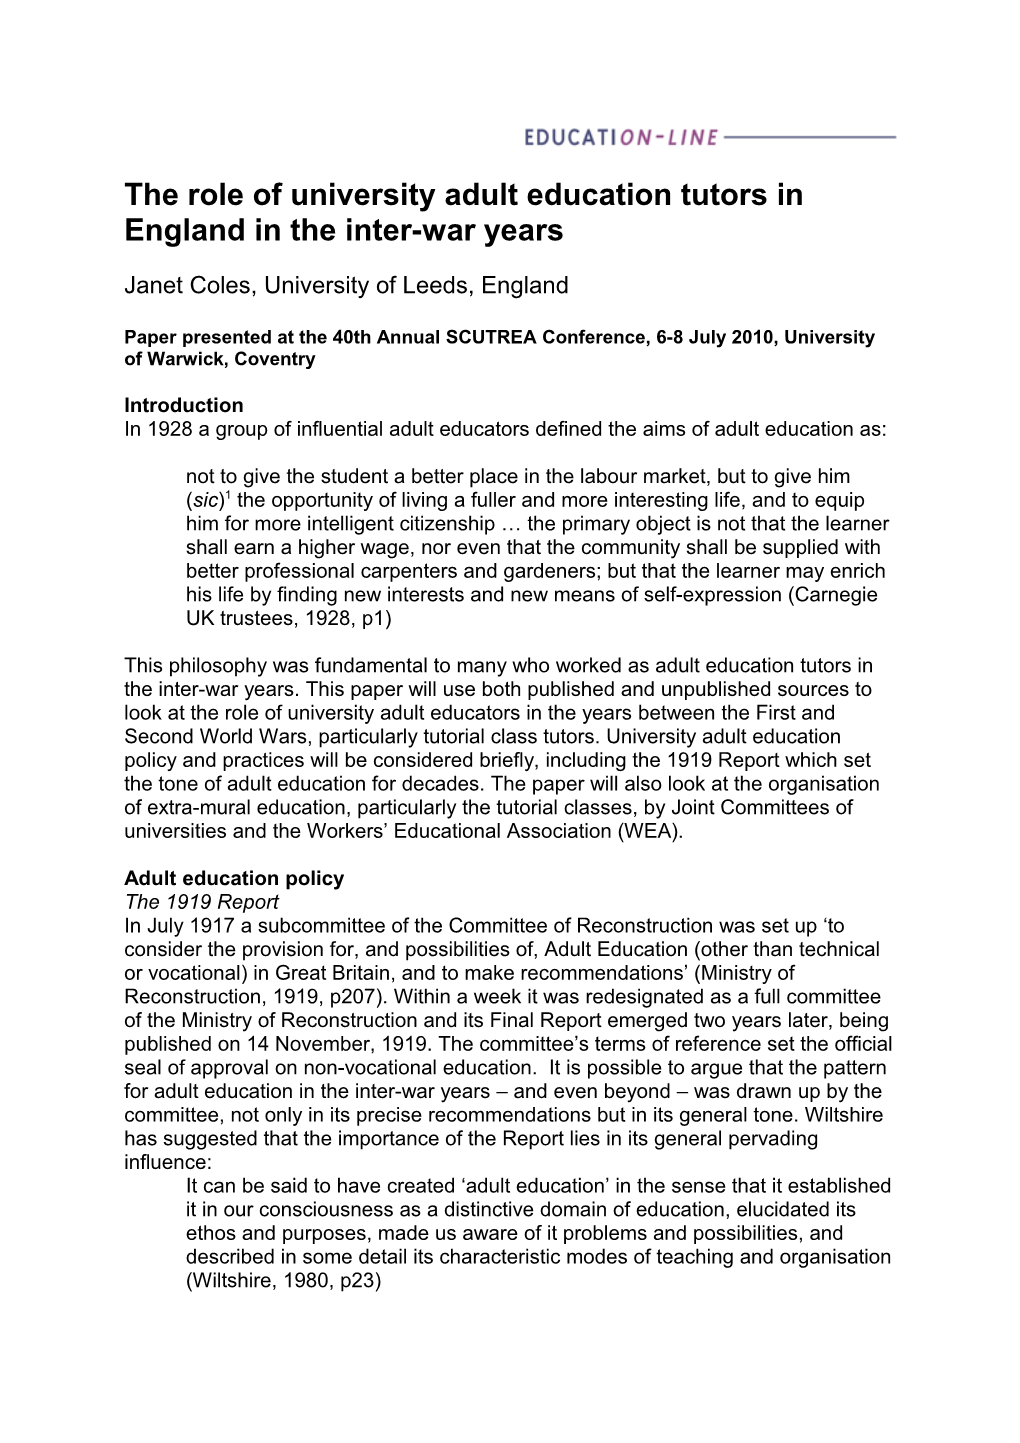 The Role of University Adult Education Tutors in England in the Inter-War Years